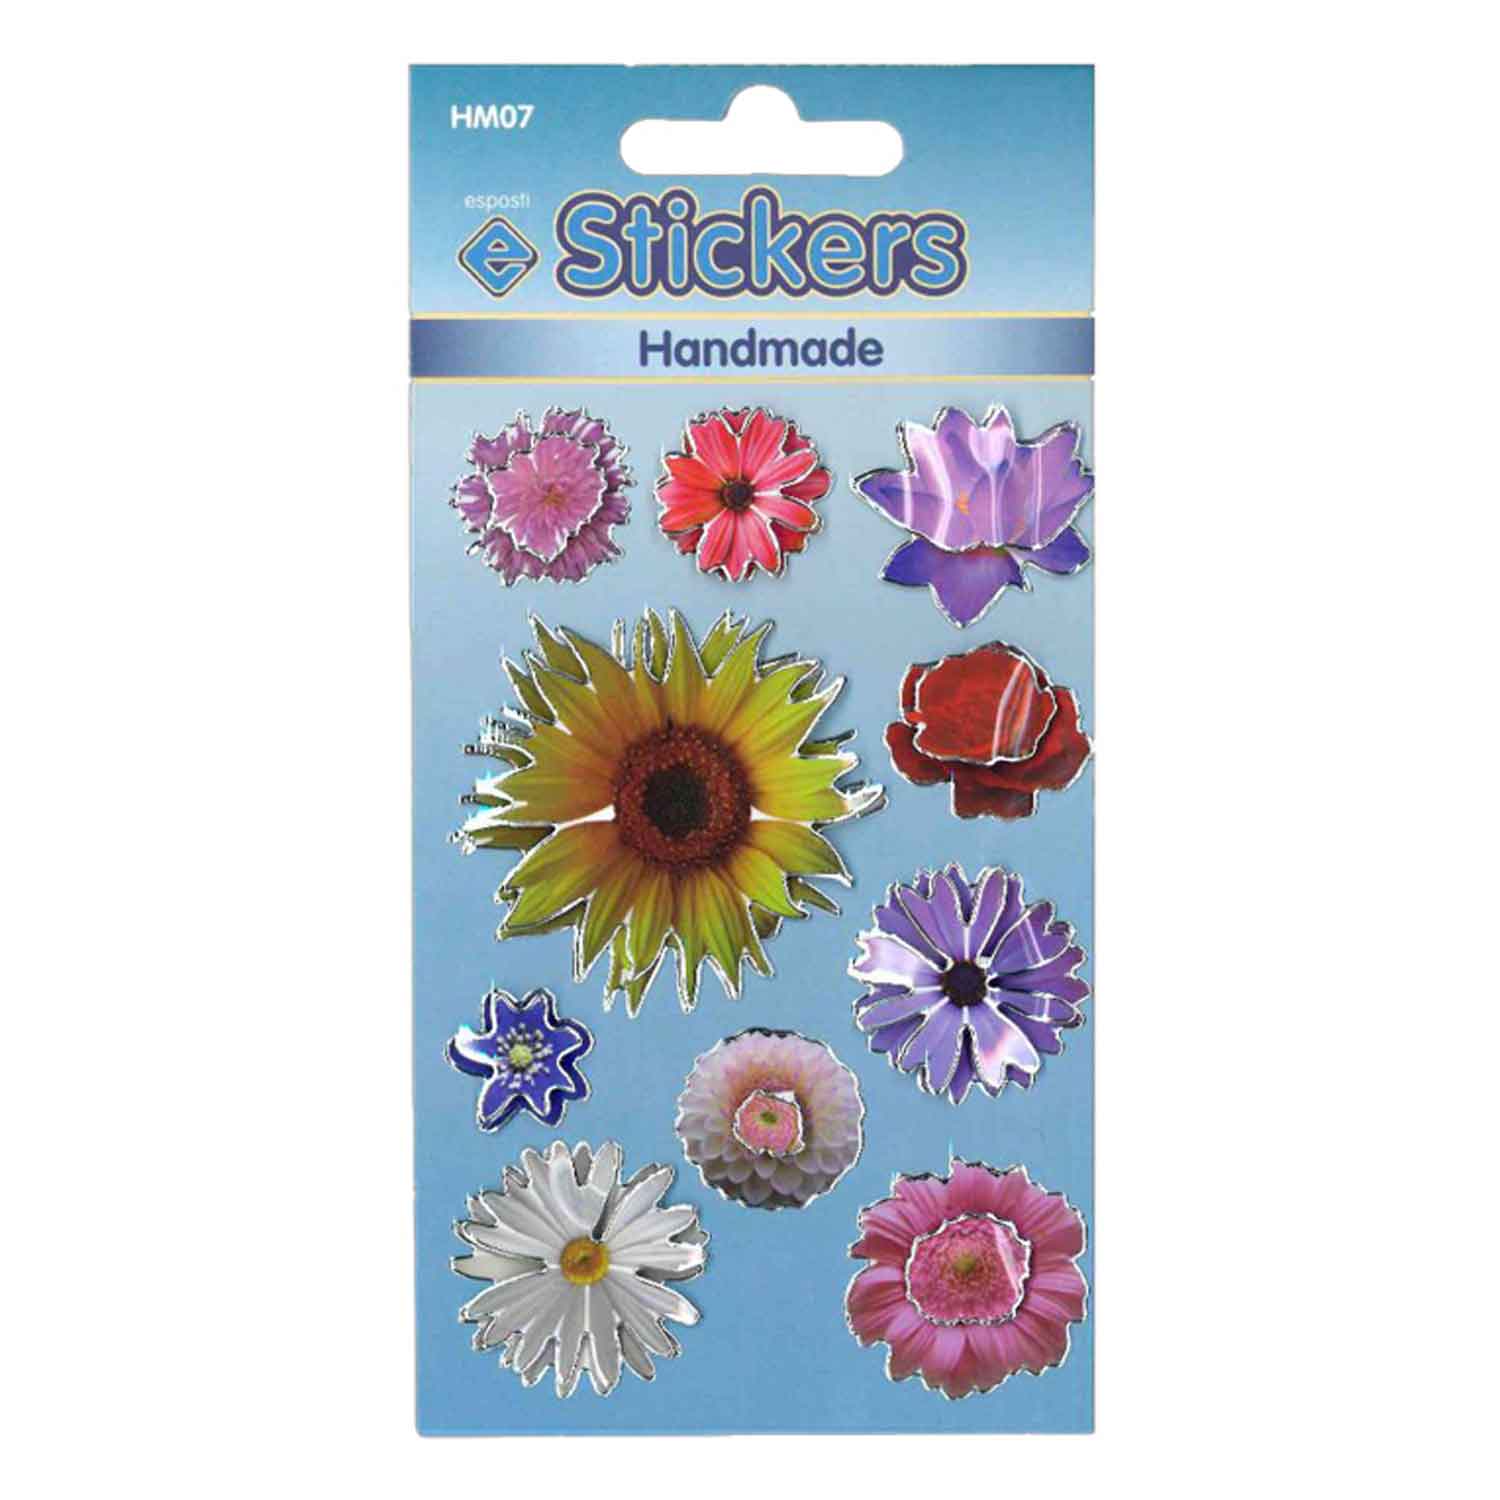 Flowers Self Adhesive Handmade Novelty Stickers - Pack of 10